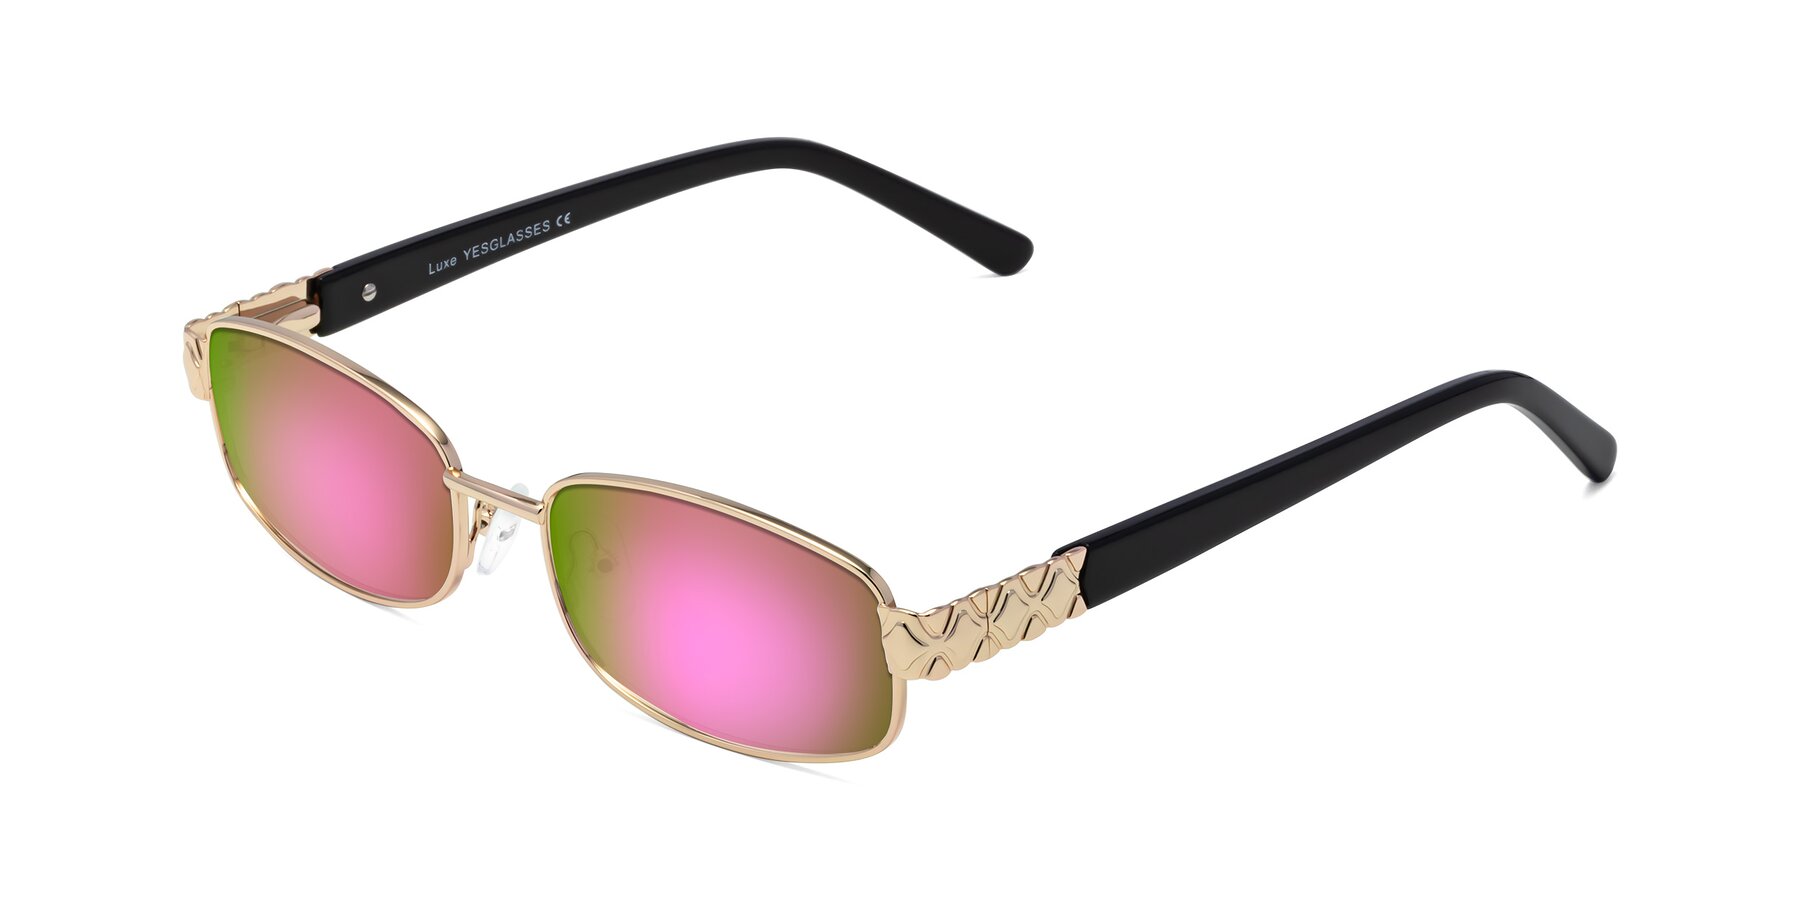 Angle of Luxe in Rose Gold with Pink Mirrored Lenses